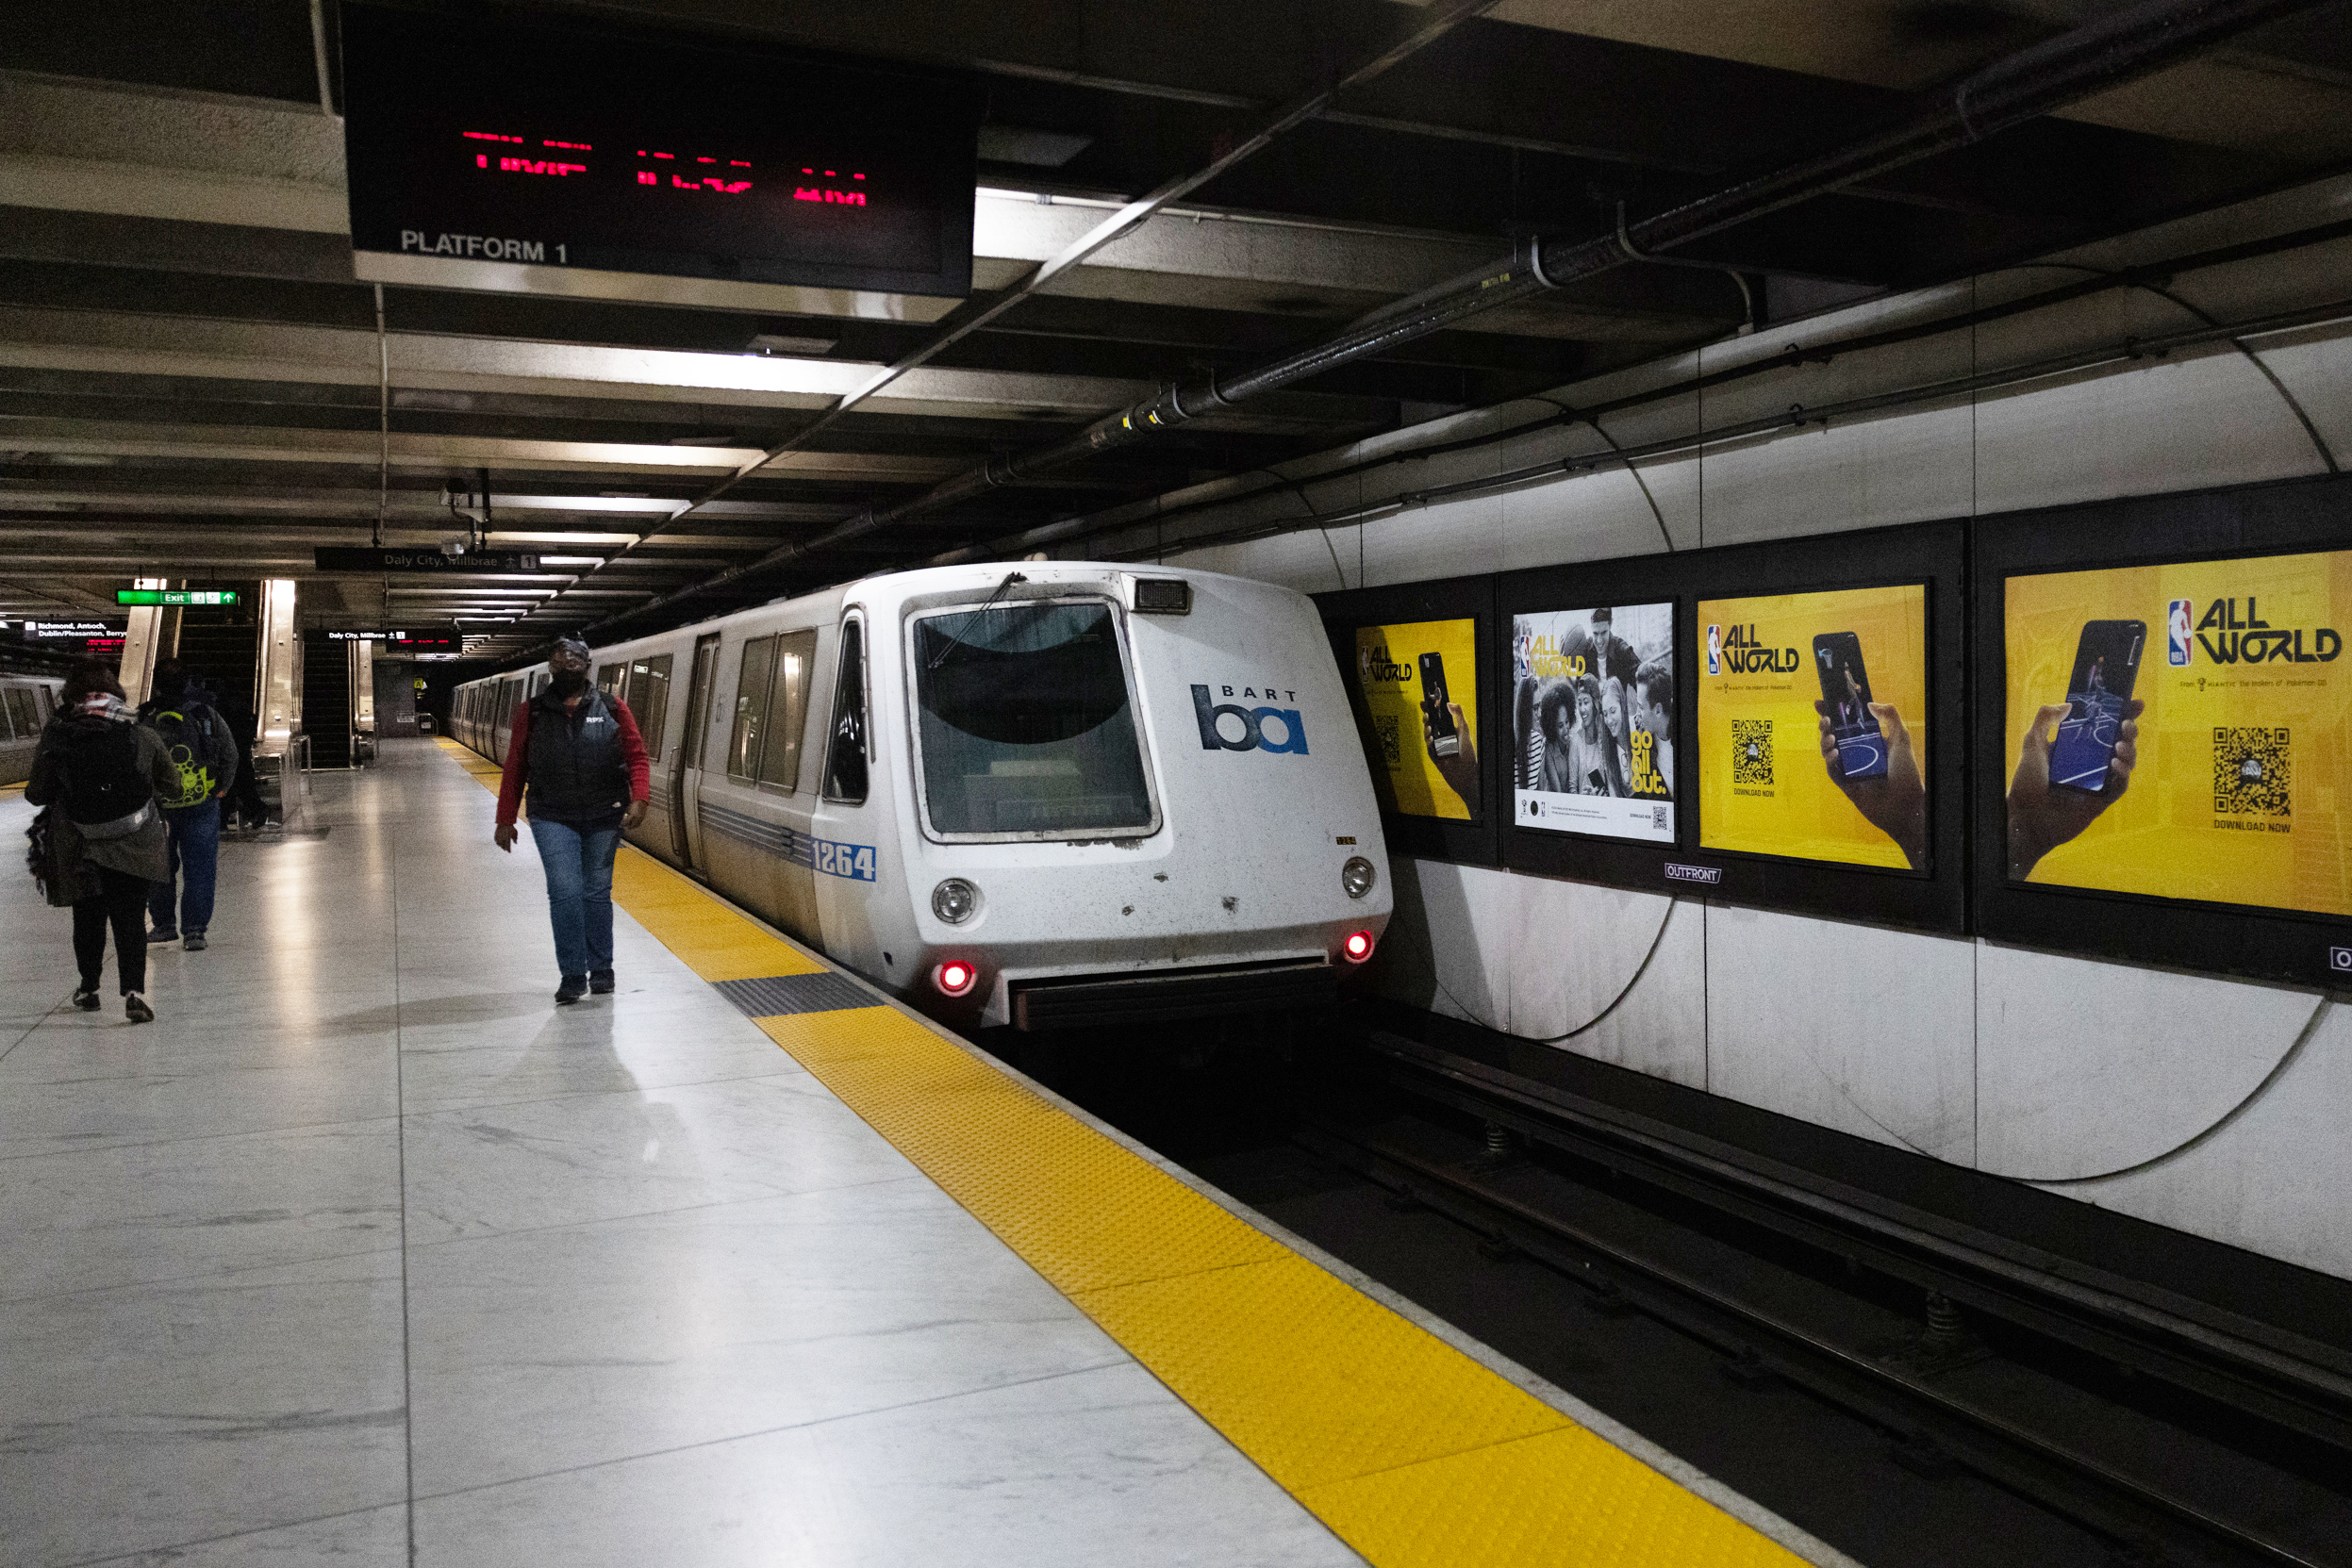 Man Dies of Apparent Drug Overdose on BART Train in Downtown San Francisco